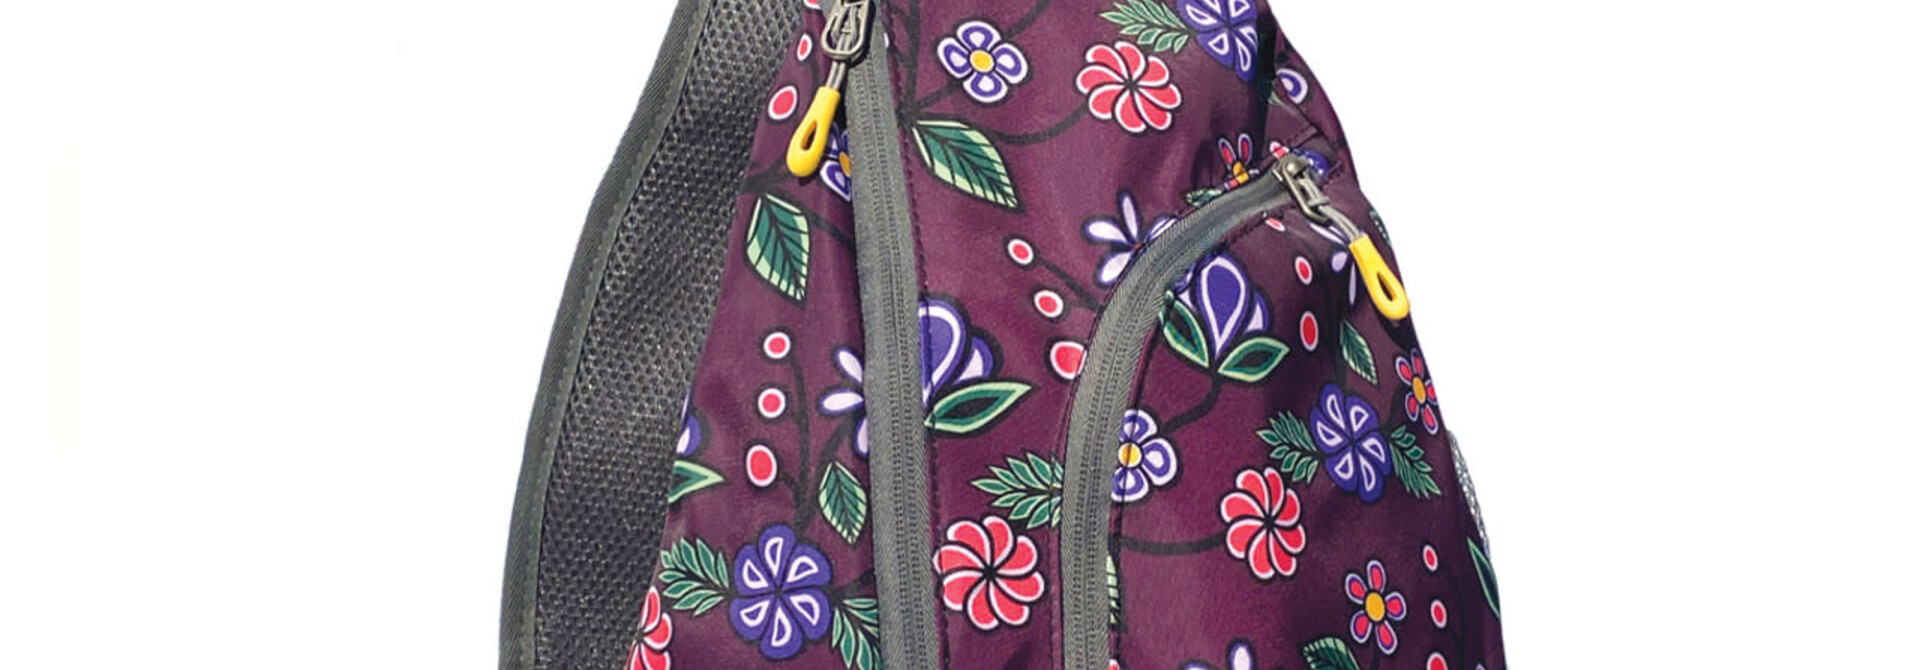 Sling Pack - Ojibwe Florals by Storm Angeconeb